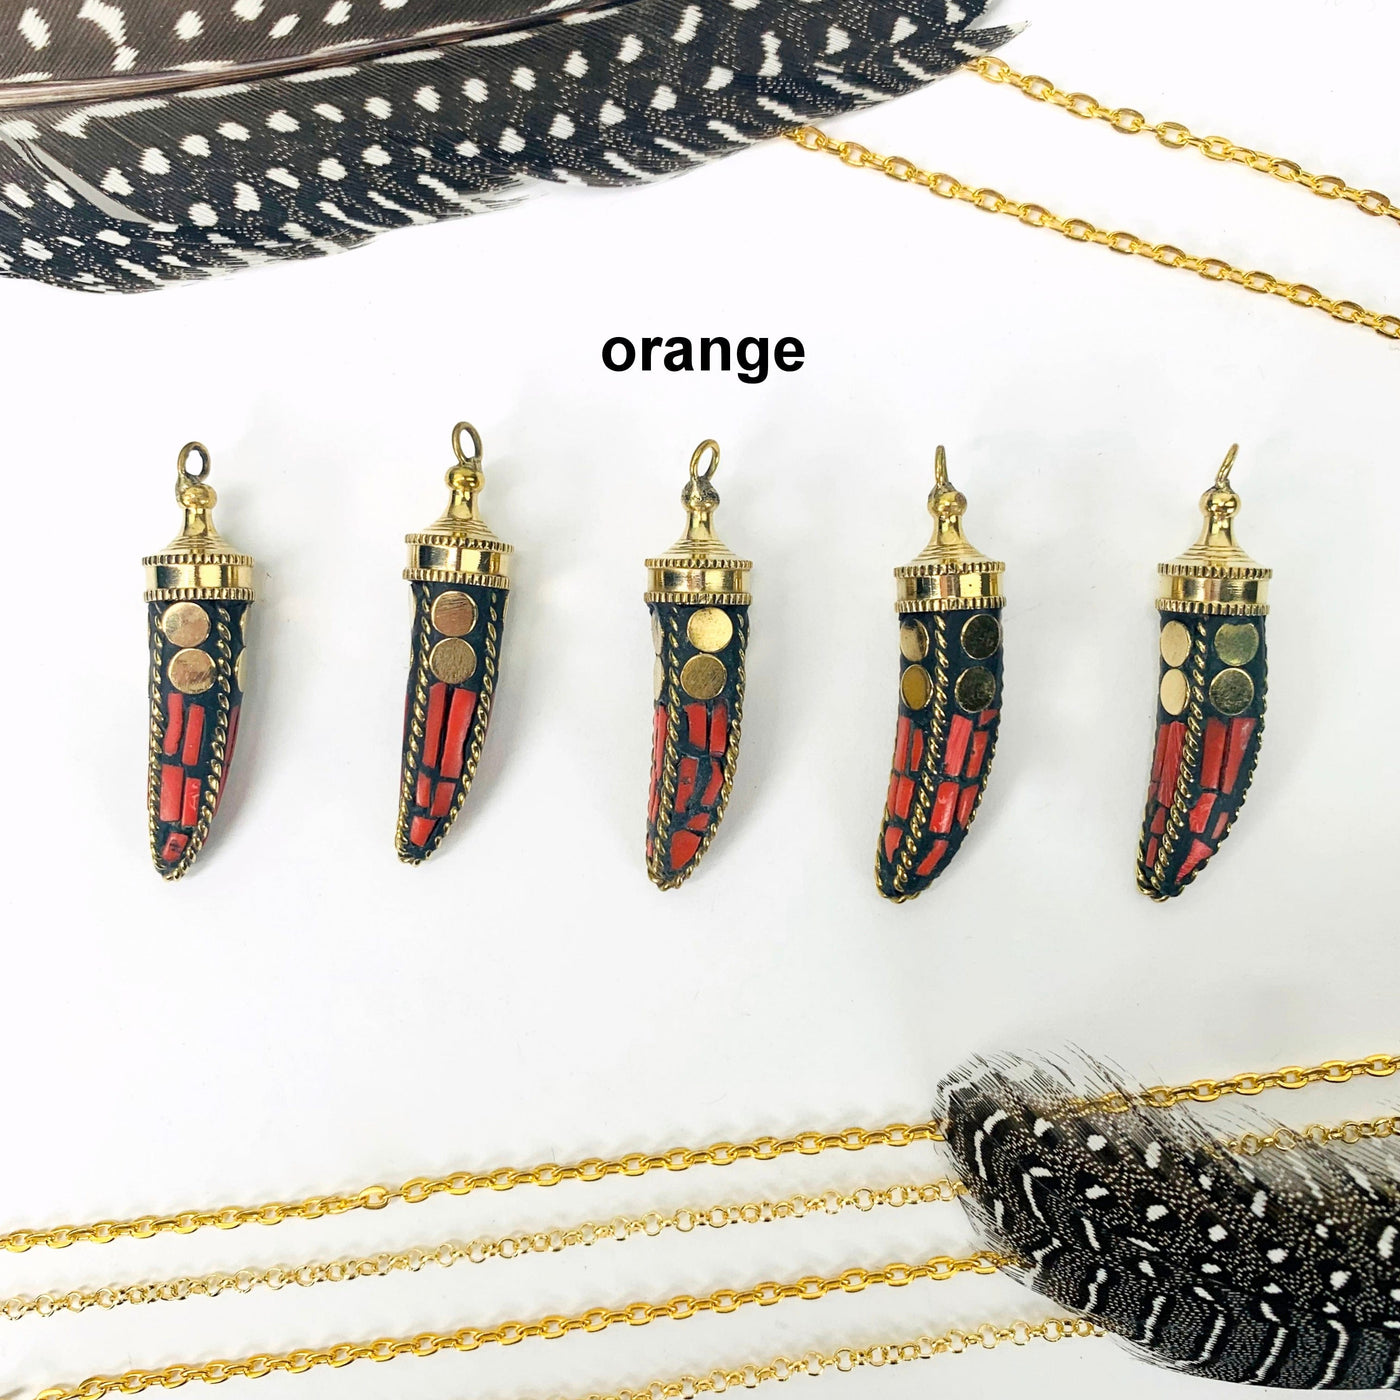 overhead view of five orange petite mosaic horn pendants in a row on white background with decorations for possible variations